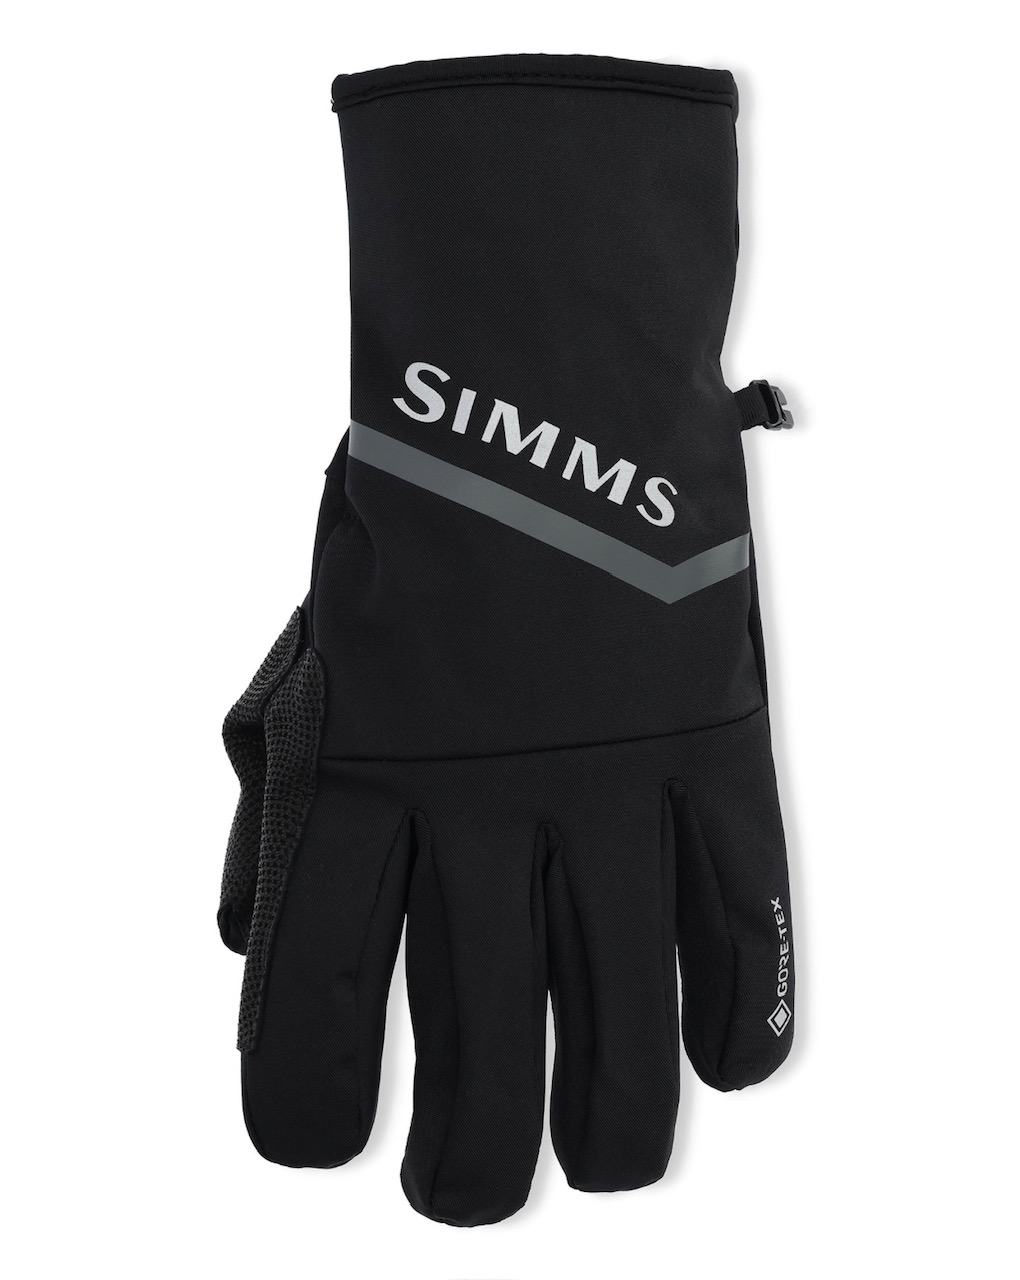 Simms Fishing ProDry Glove and Liner